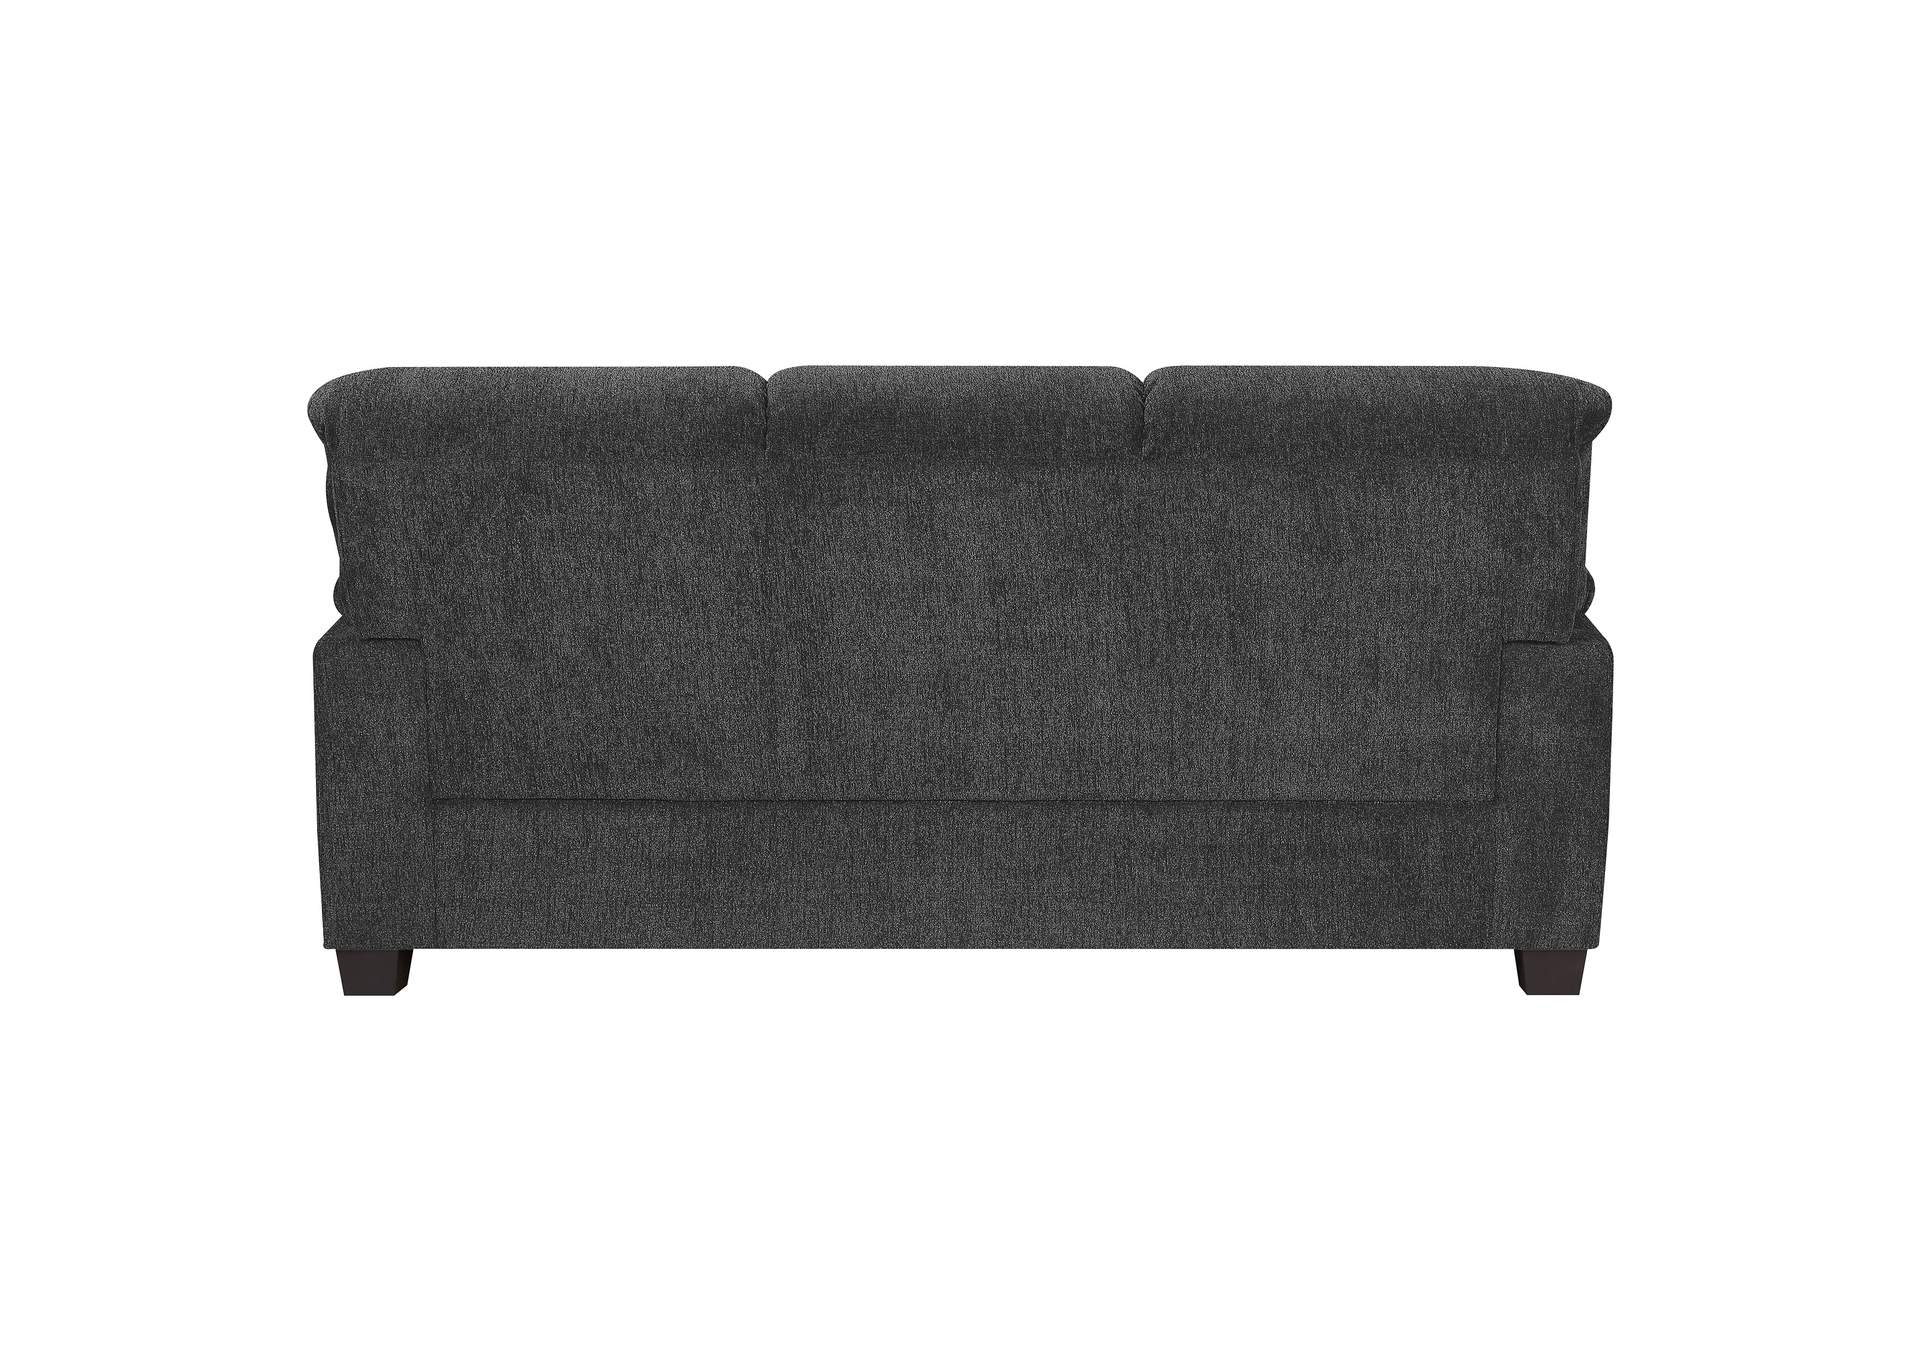 Clementine Upholstered Sofa with Nailhead Trim Grey,Coaster Furniture